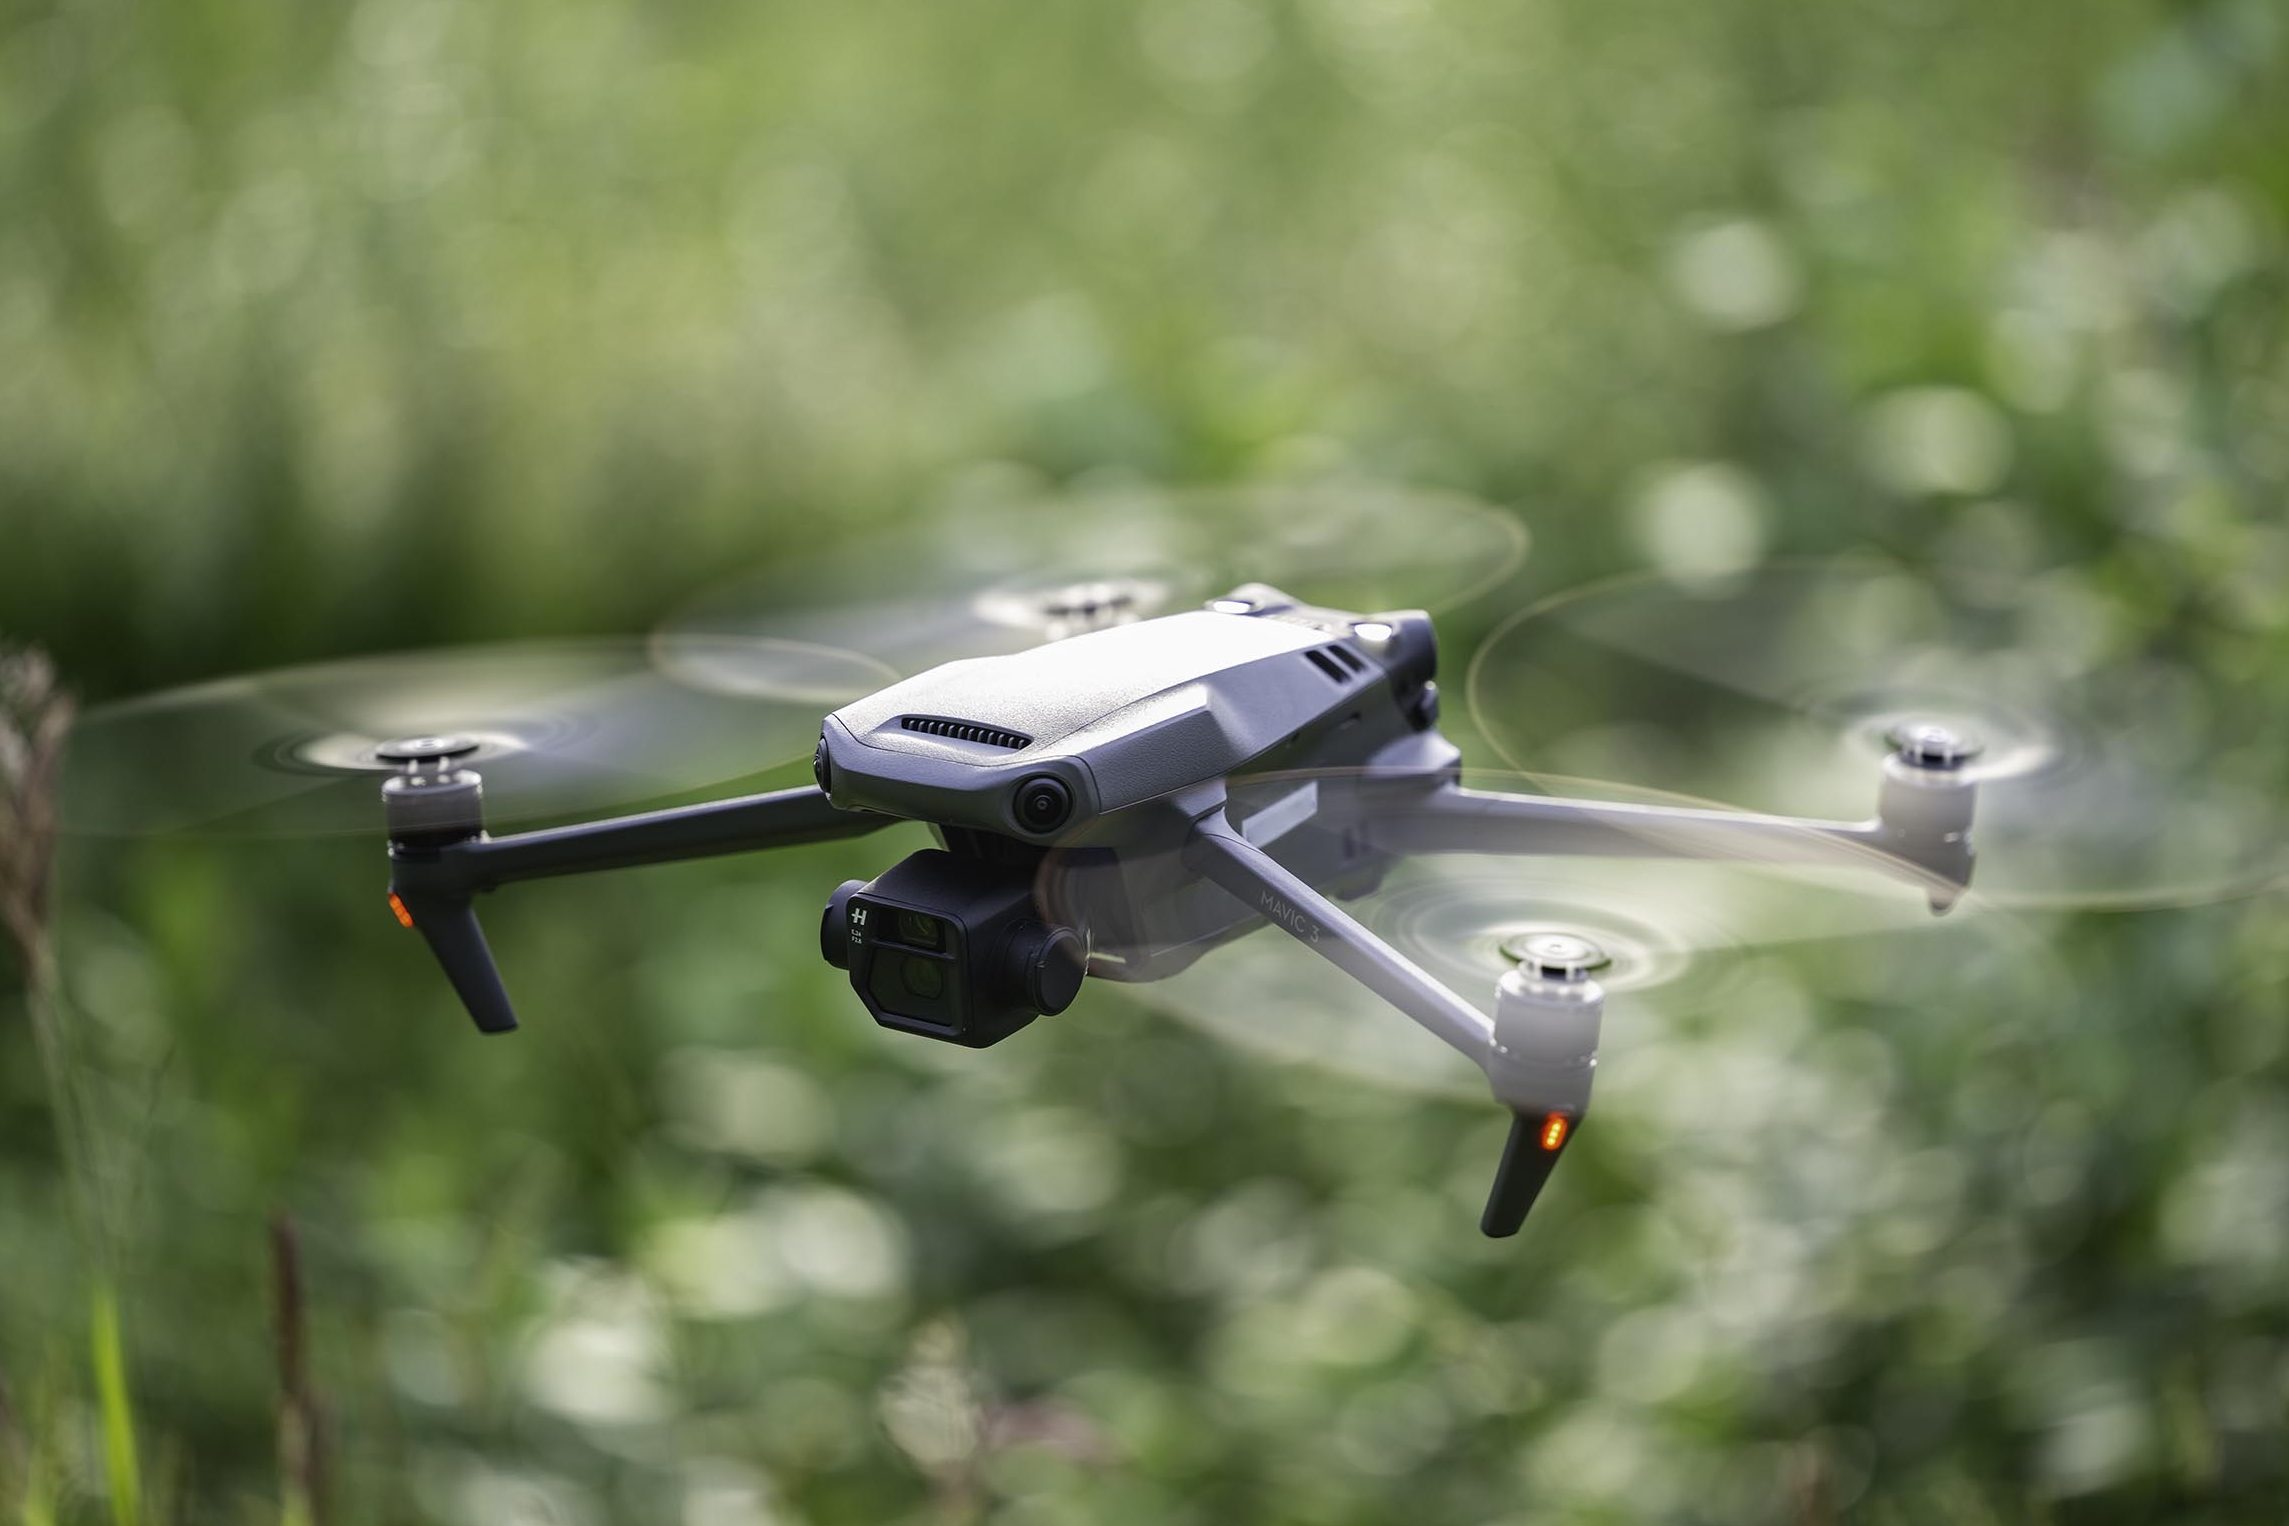 The DJI Mavic 3 in flight with a blurred green background.